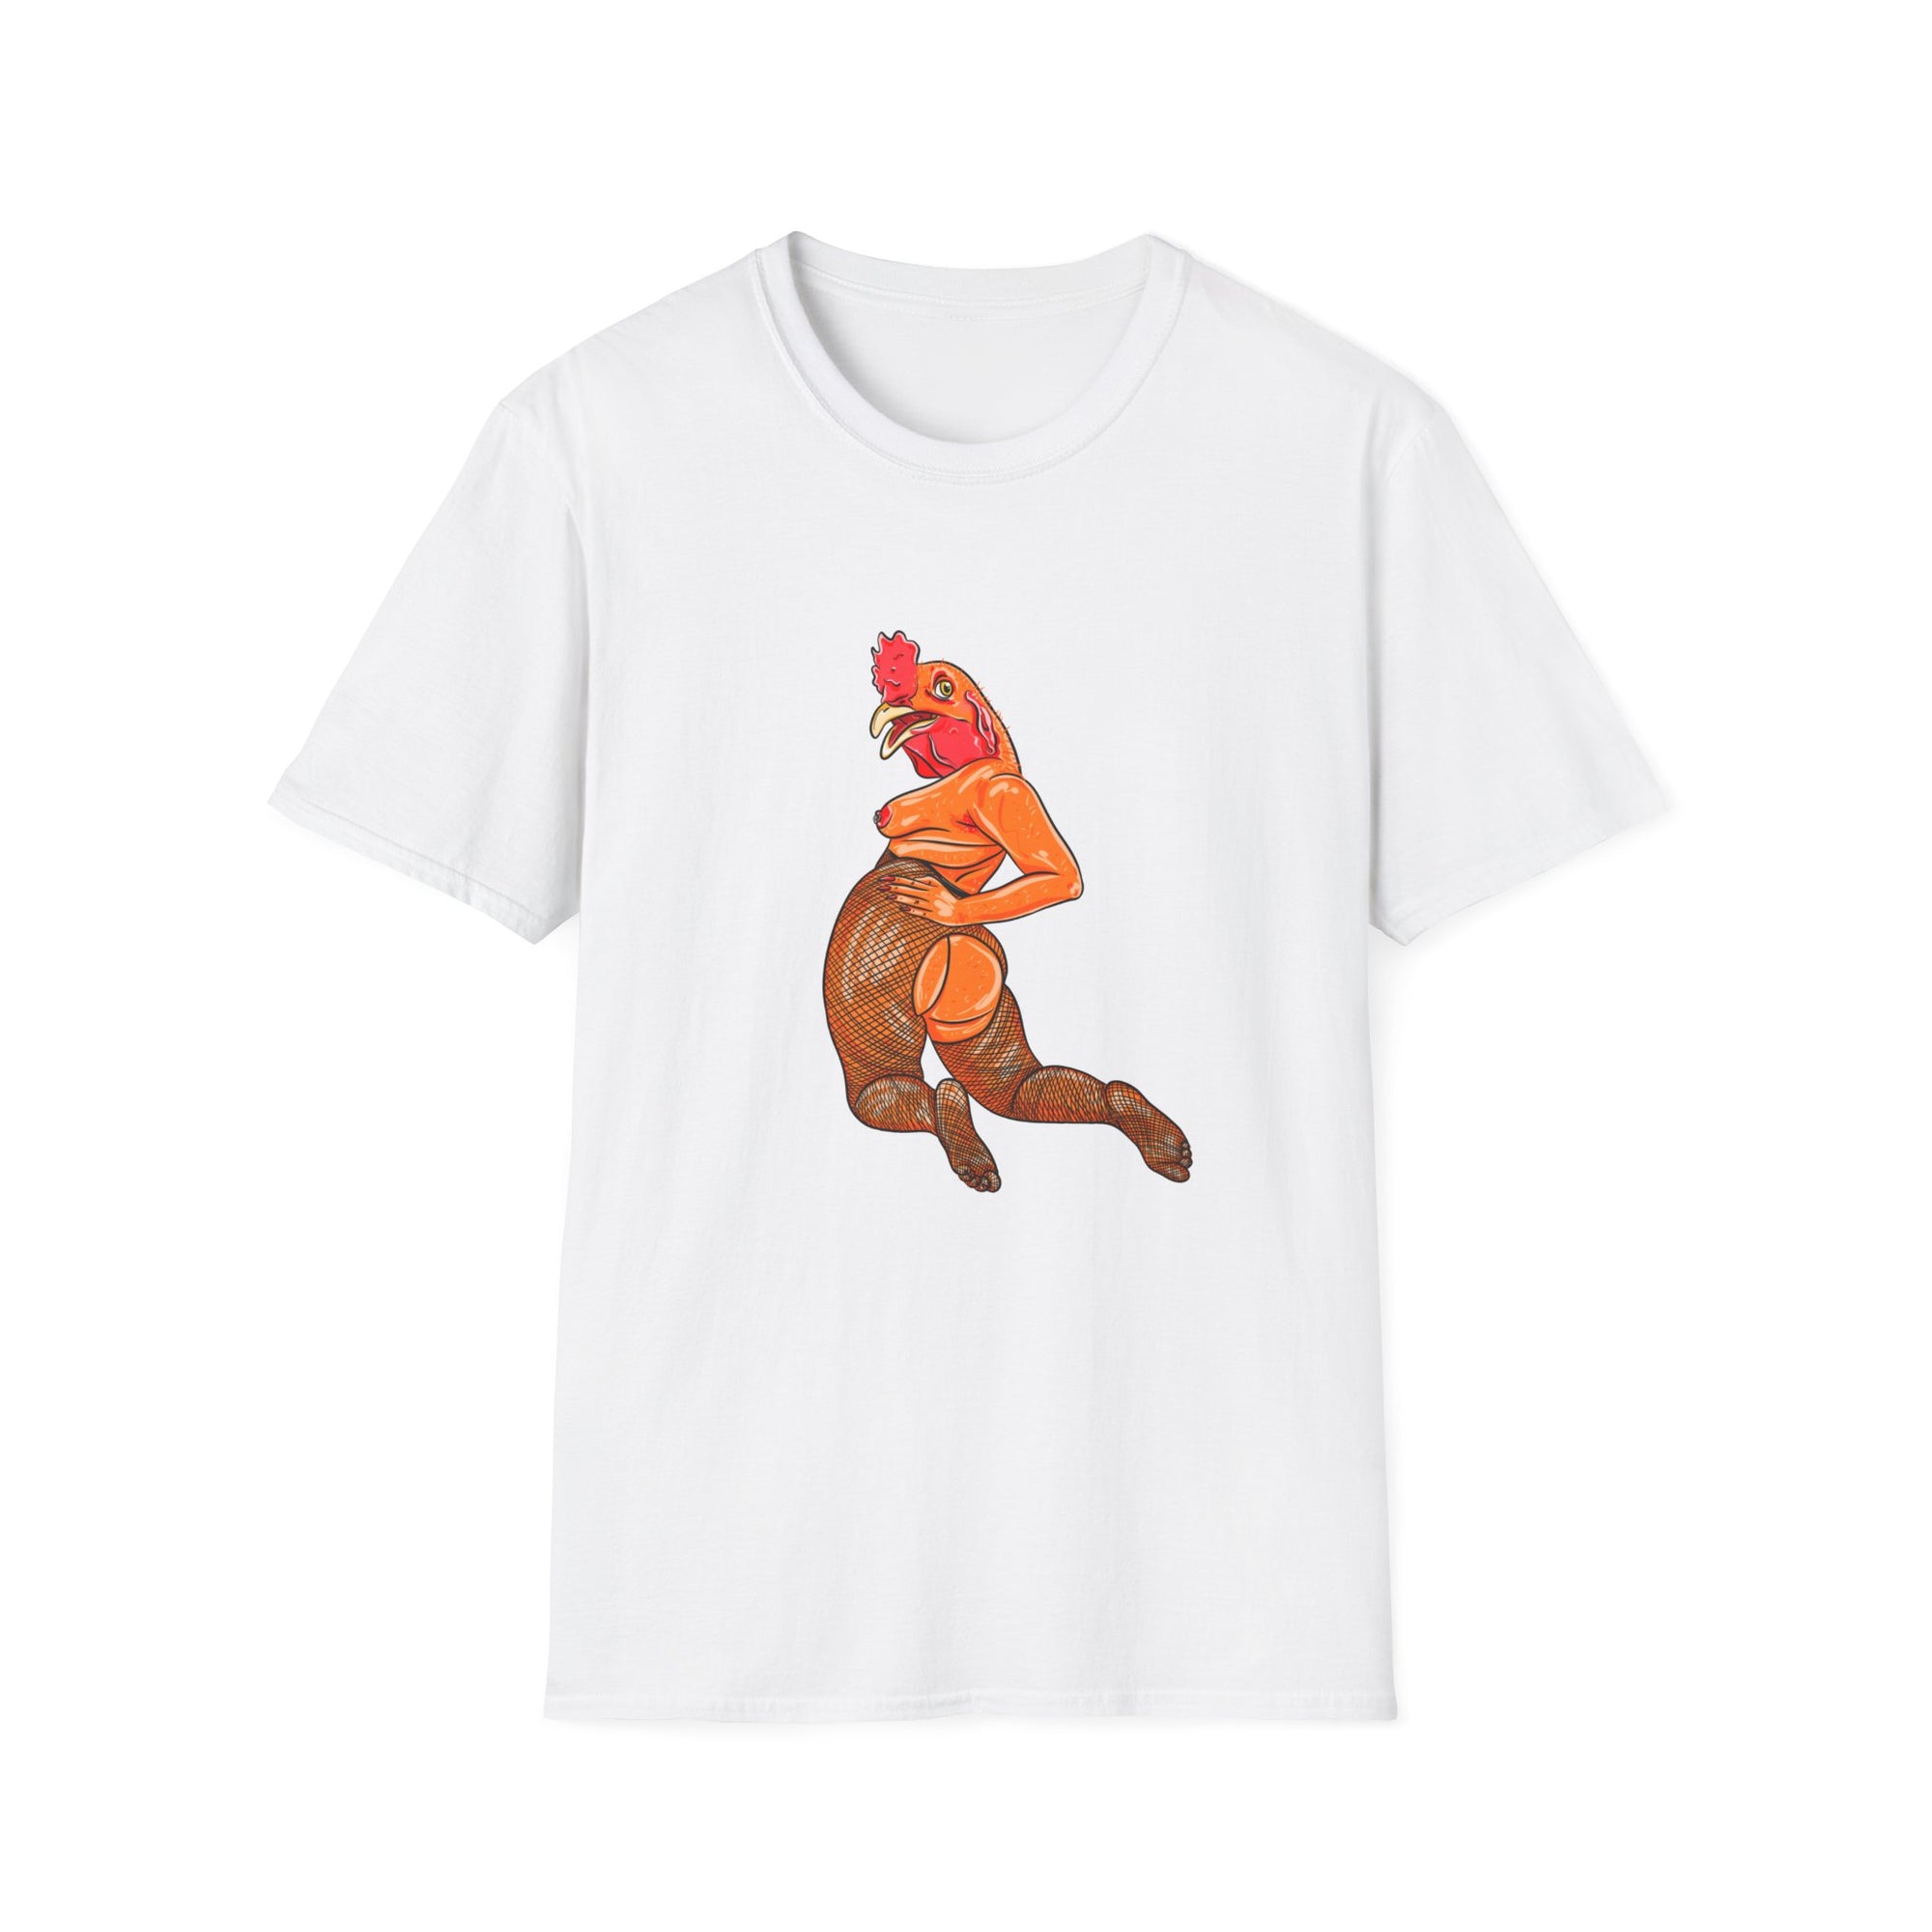 SHAKE YOUR TAIL FEATHER - Unisex Shirt